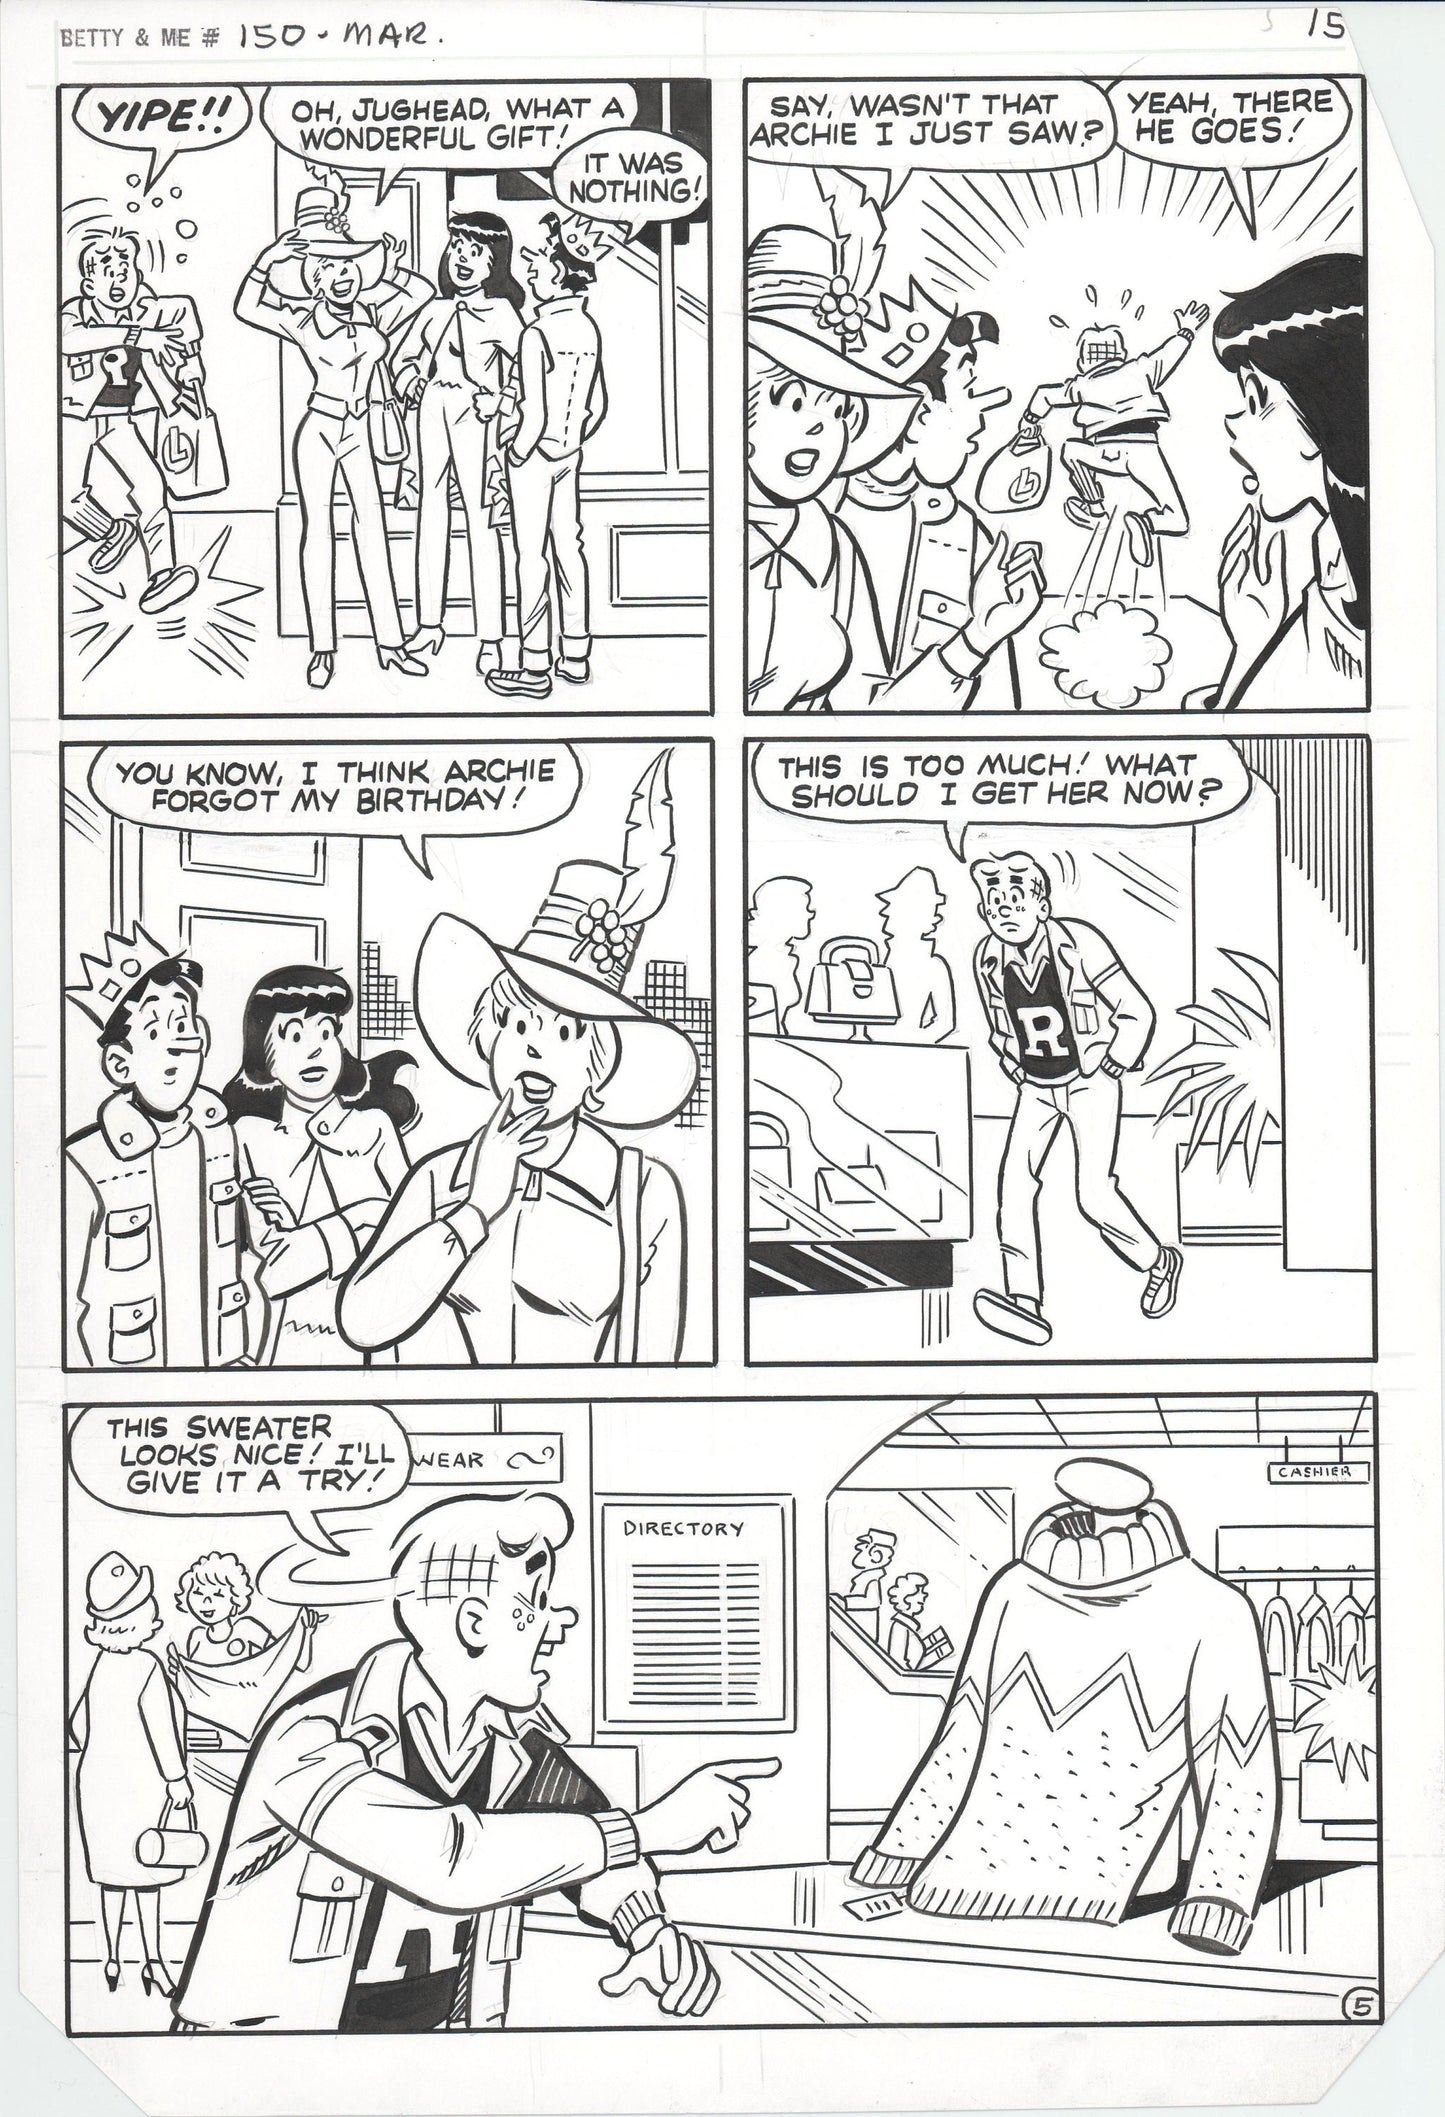 Archie 1986 Betty and Me Original Hand-inked comic page #150 by Stan Goldberg Rudy Lapick and Mark Esposito p15